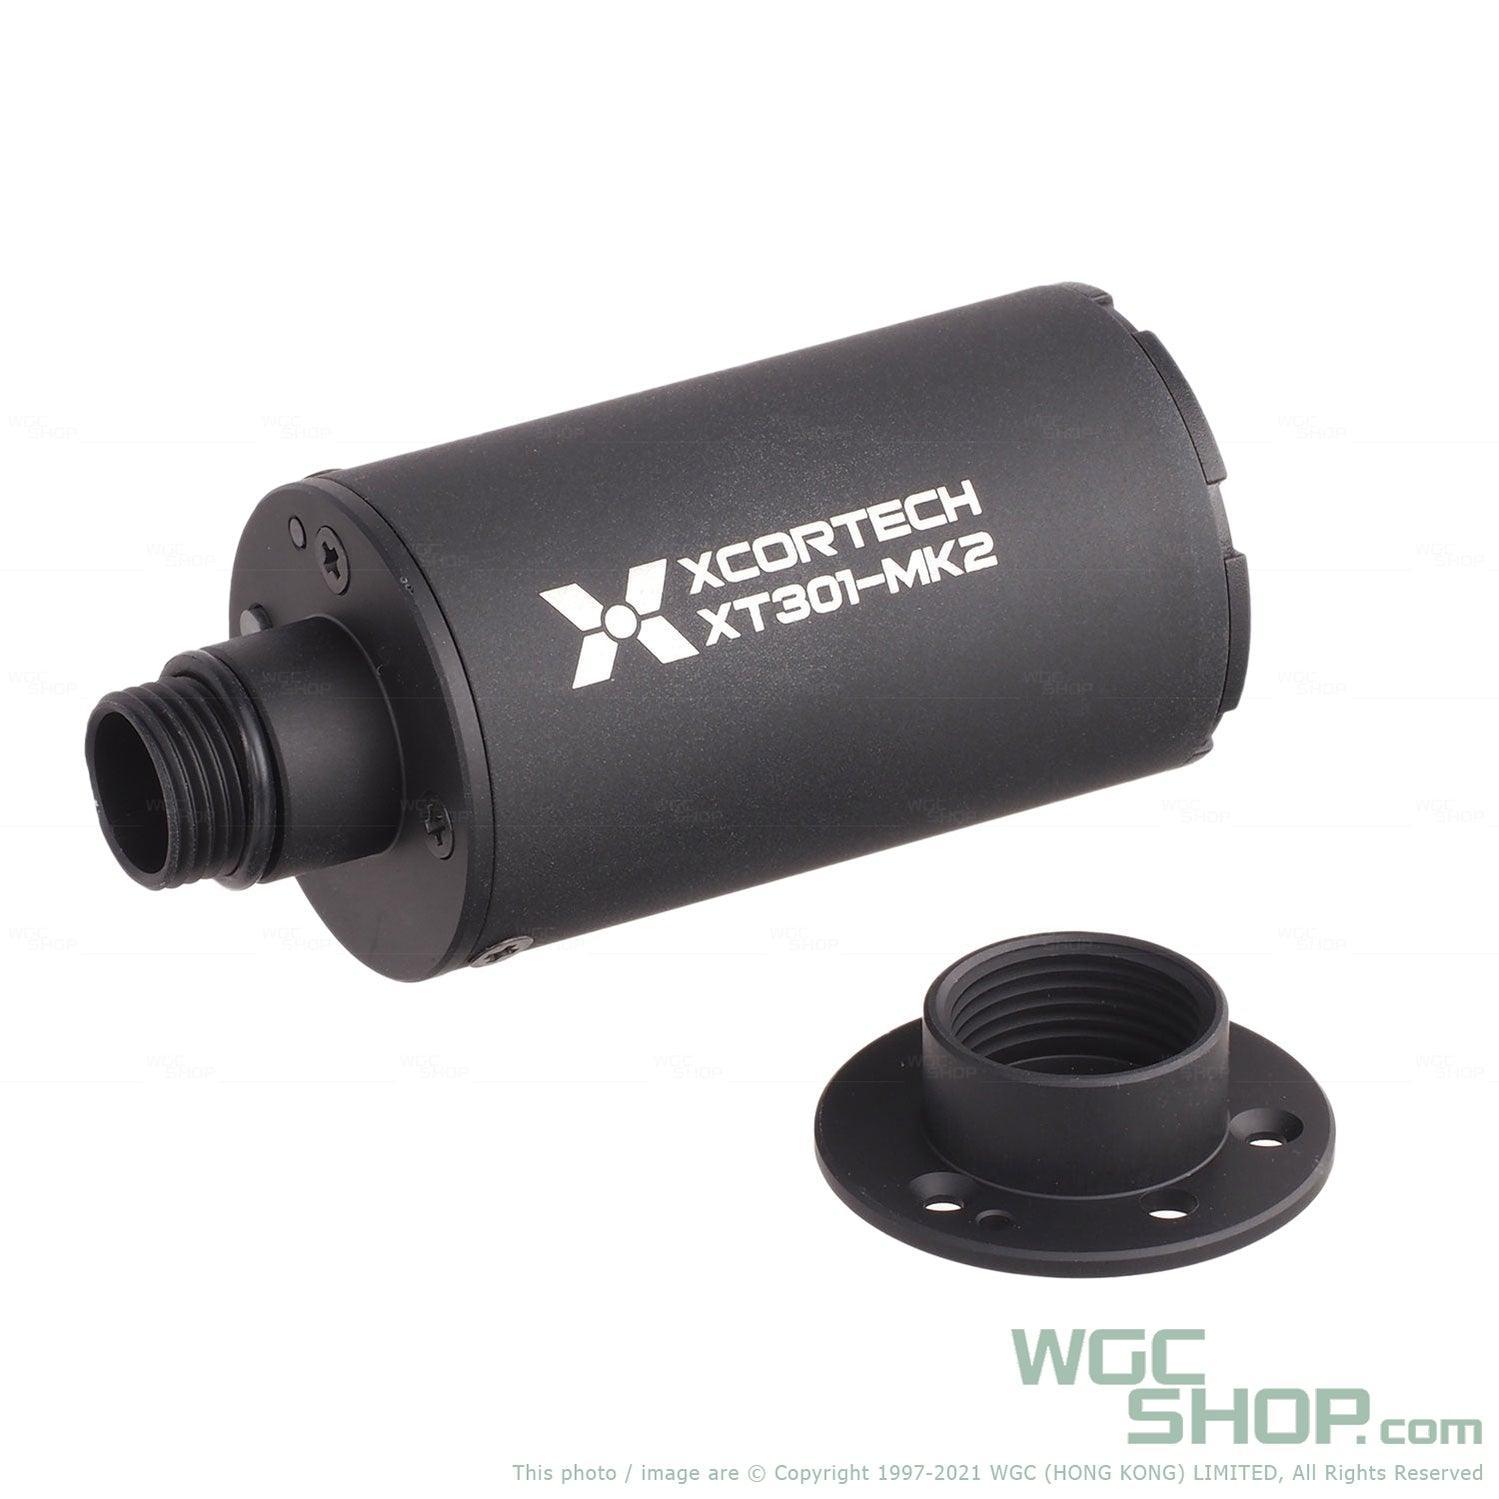 XCORTECH XT301 MK2 Compact Airsoft Tracer Unit